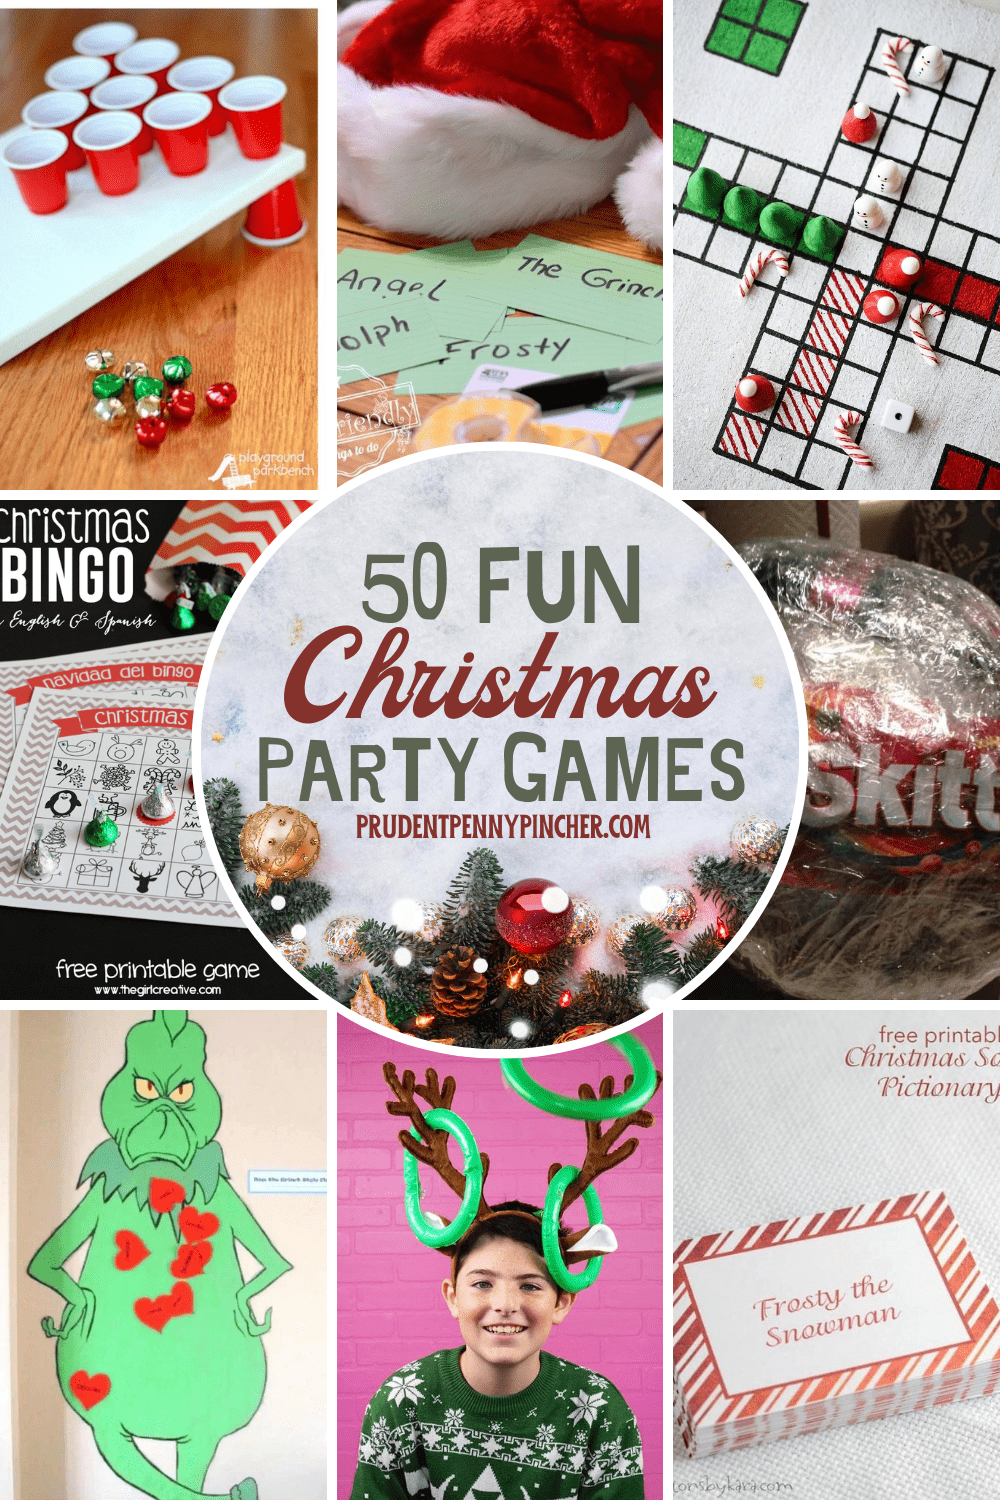 55 Fun Christmas Activities for Families, Couples, Kids & Adults!